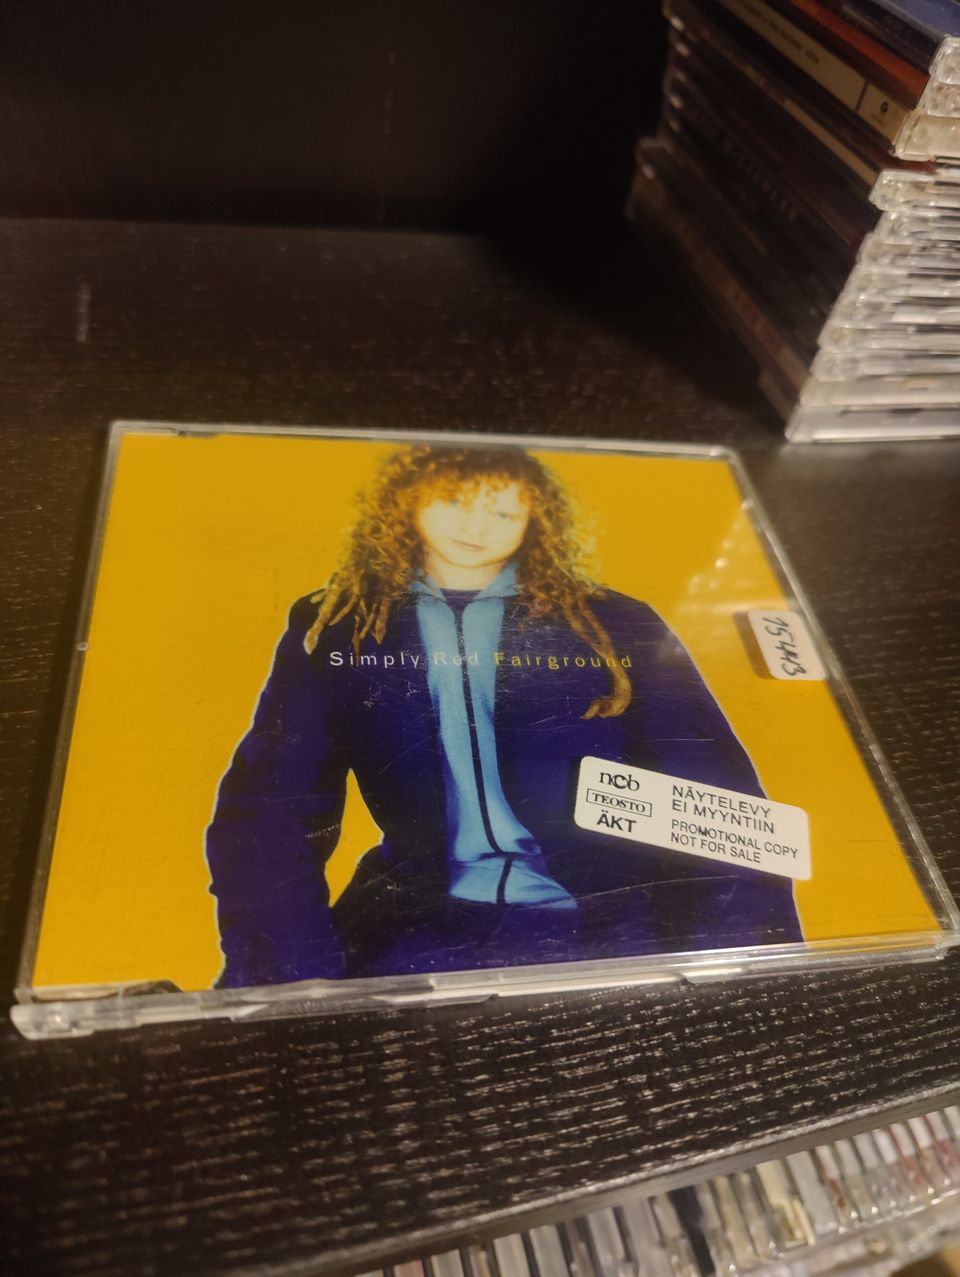 Simply red cds tarjoa!